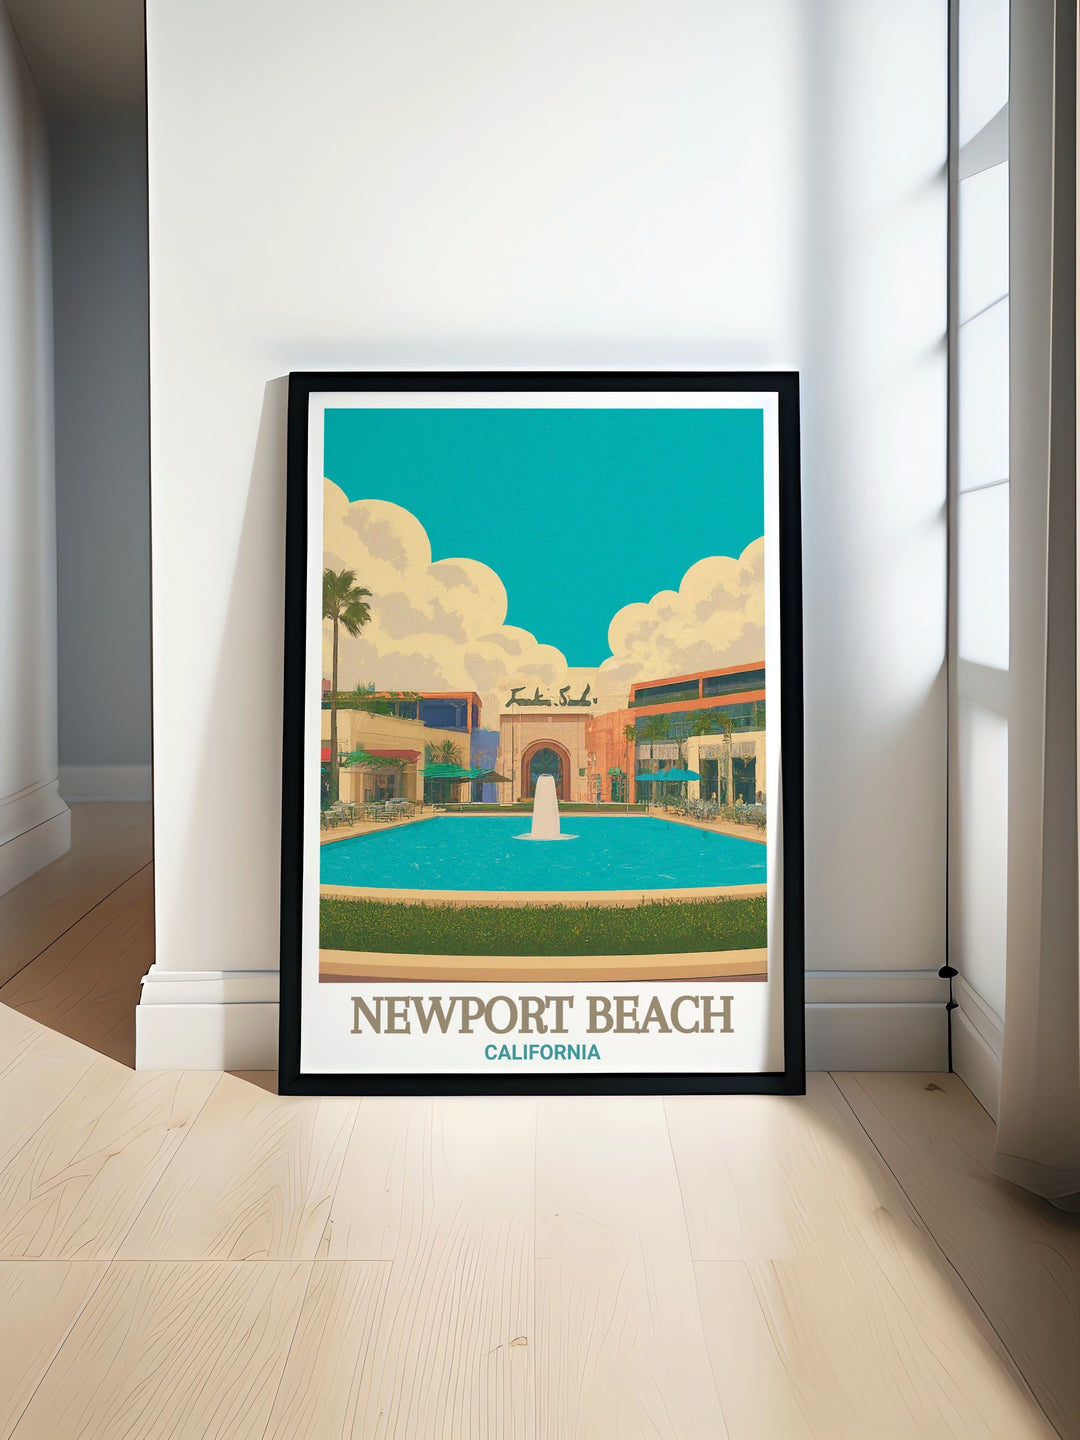 Newport Beach artwork featuring Fashion Island brings the luxurious beauty of Californias coastline to your home. Perfect for adding a touch of coastal elegance to your decor. The detailed design showcases the charm and vibrant atmosphere of this iconic destination.